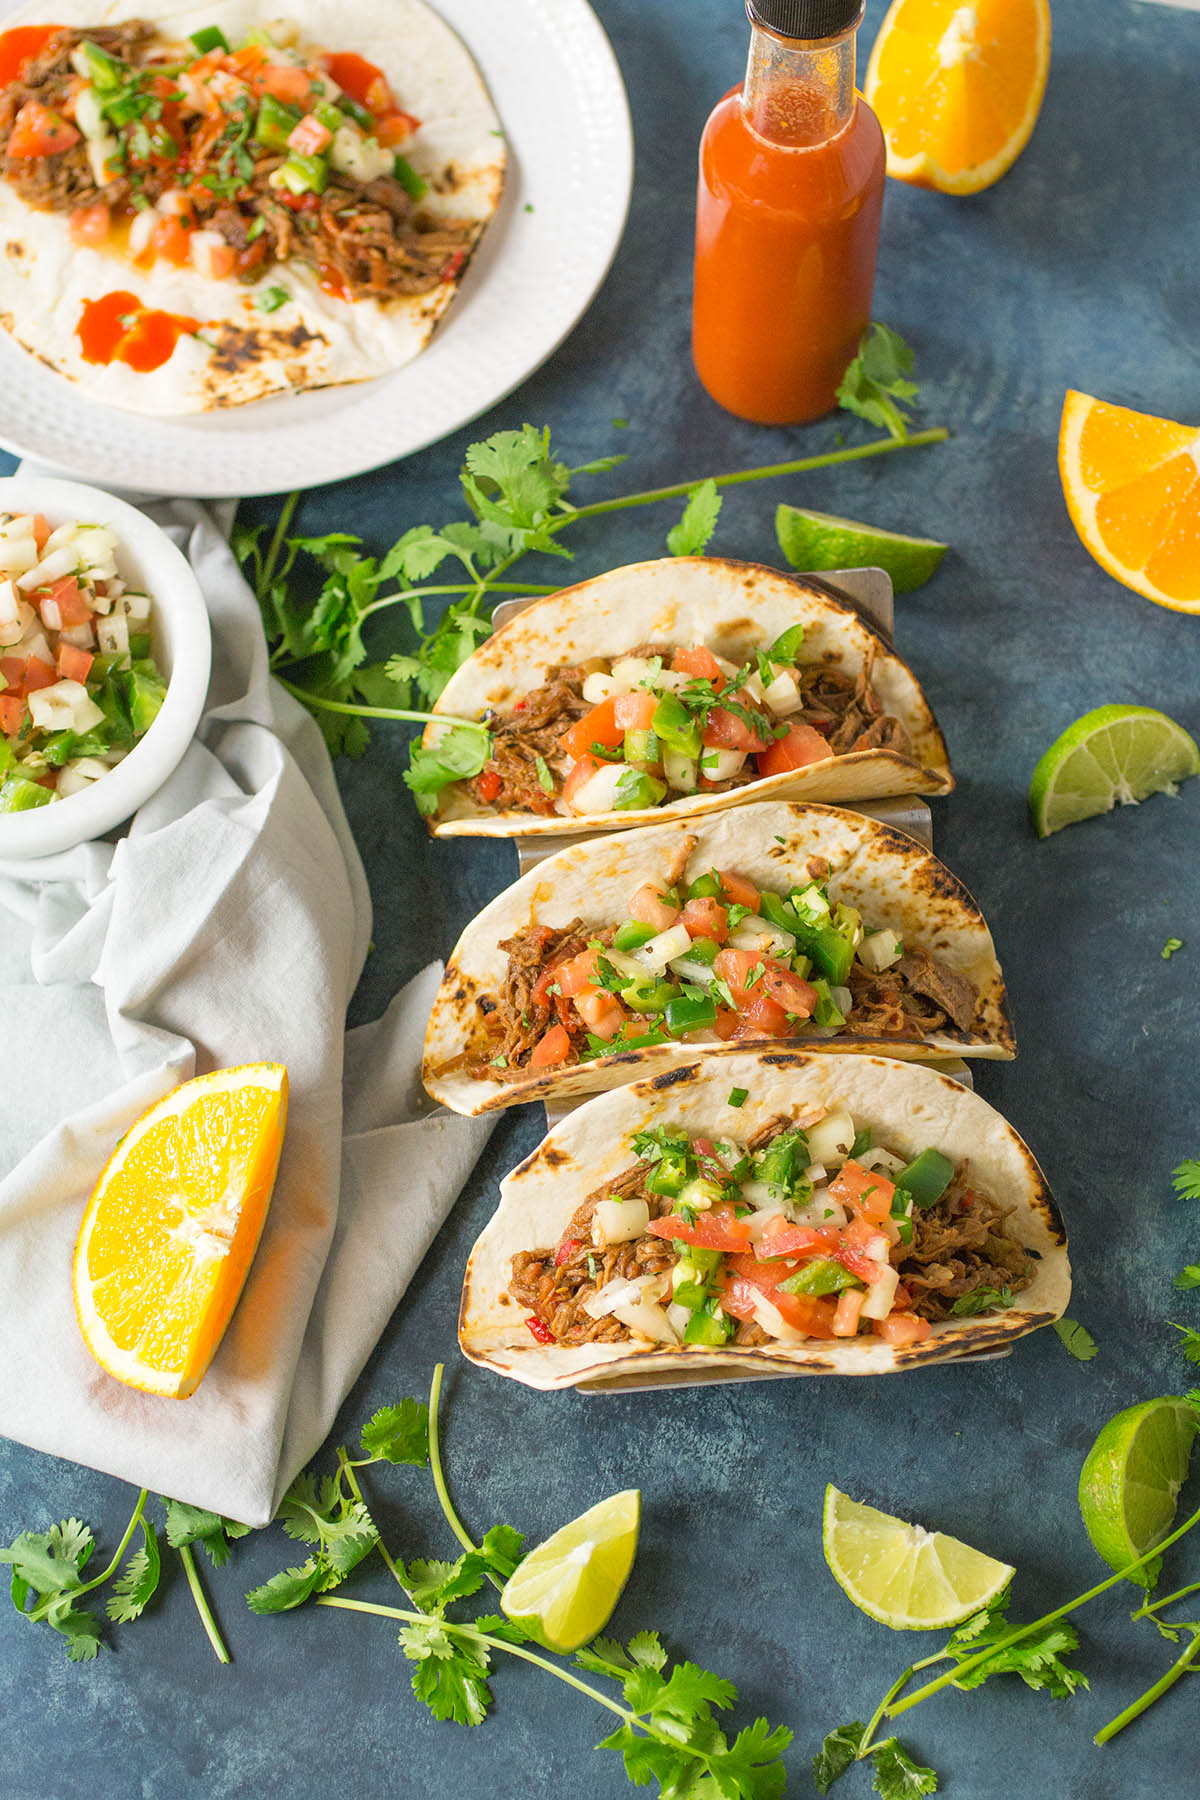 Cuban-Style Shredded Beef Tacos with Mojo Salsa – Recipe